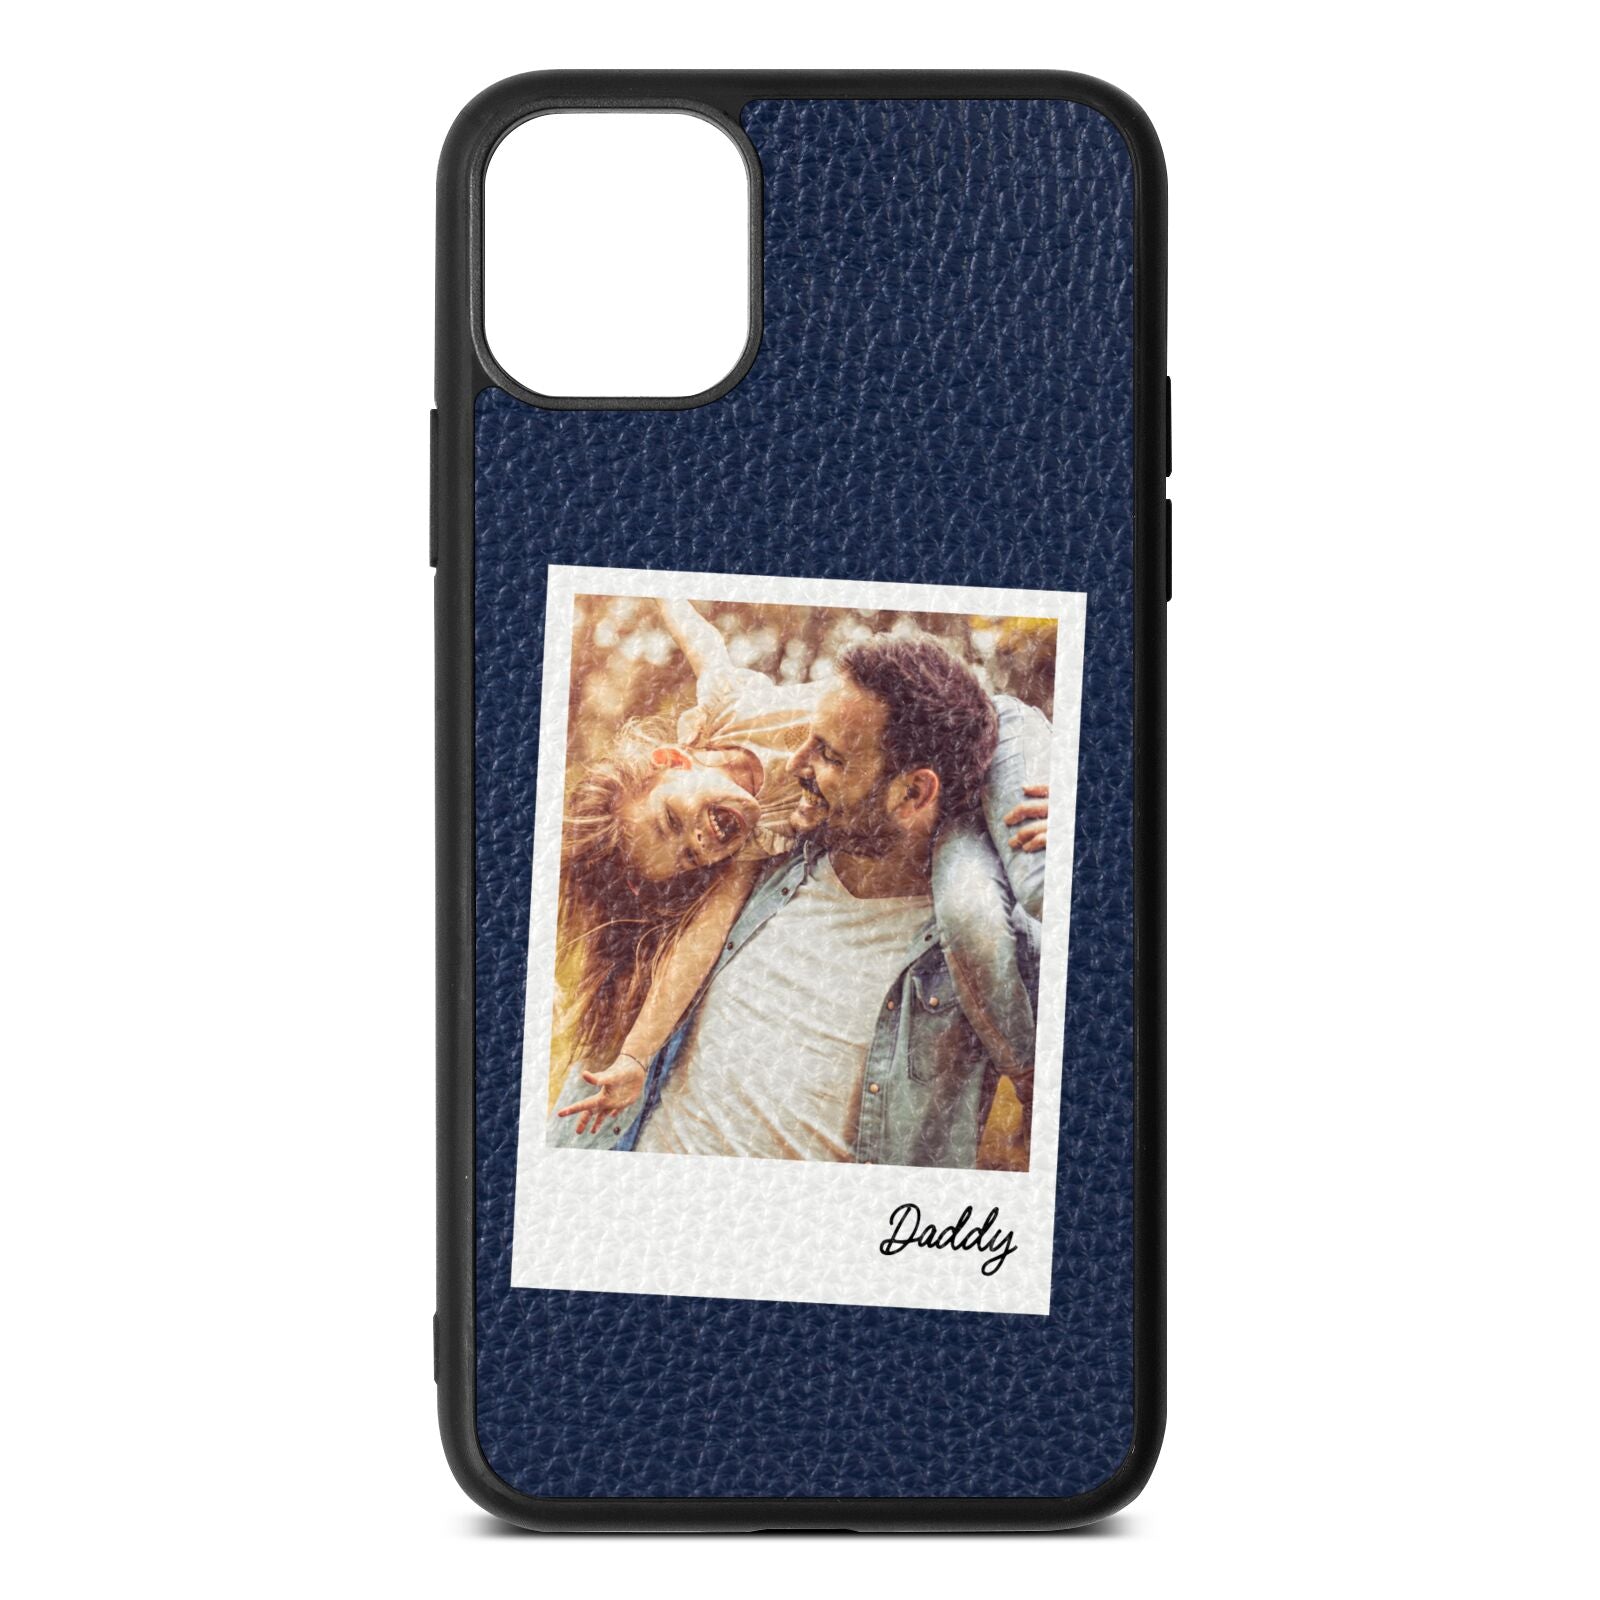 Fathers Day Photo Navy Blue Pebble Leather iPhone 11 Pro Max Case